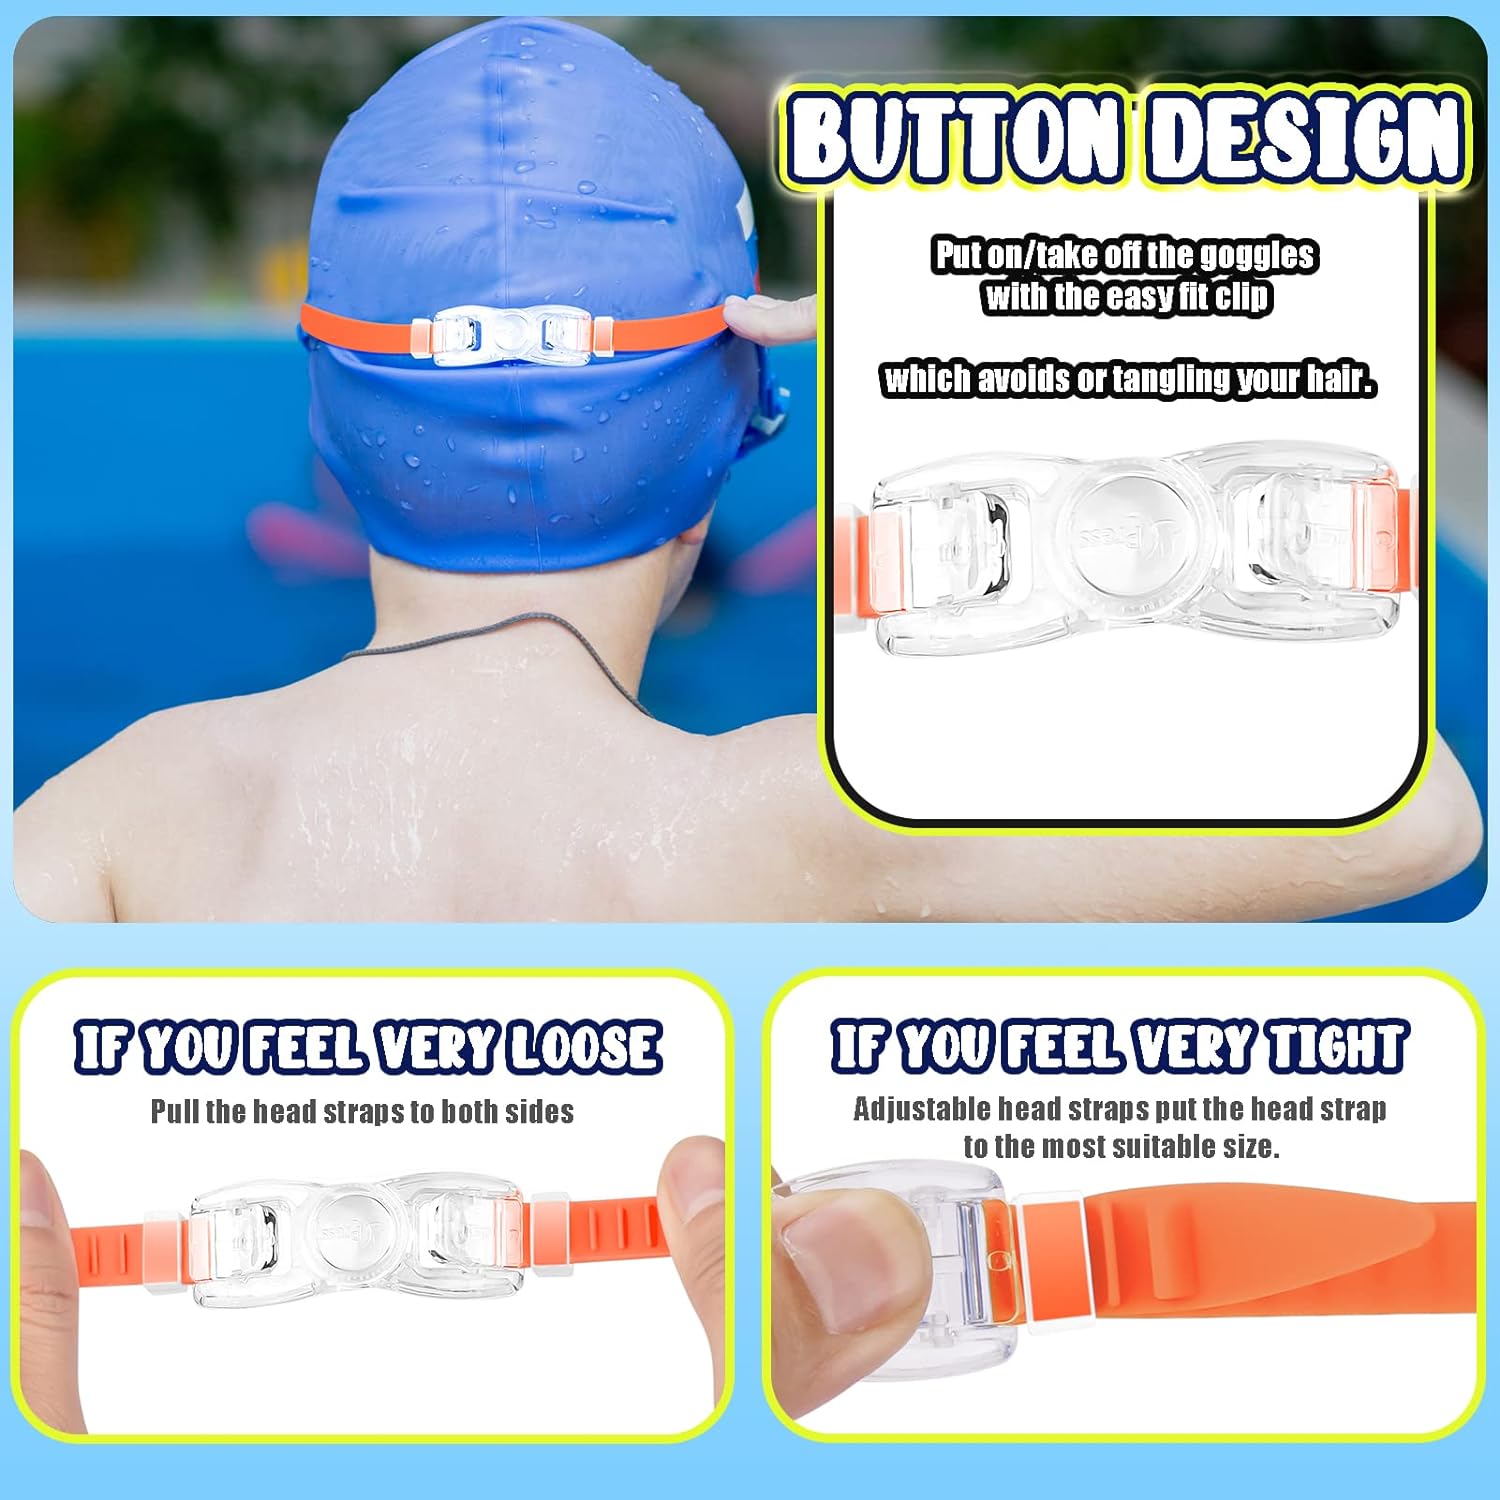 Dizywiee Frameless Kids Swim Goggles, 2-Pack Swimming Goggles for Kids, Child, Boys or Girls From 6-12, Wide View Pool Goggle